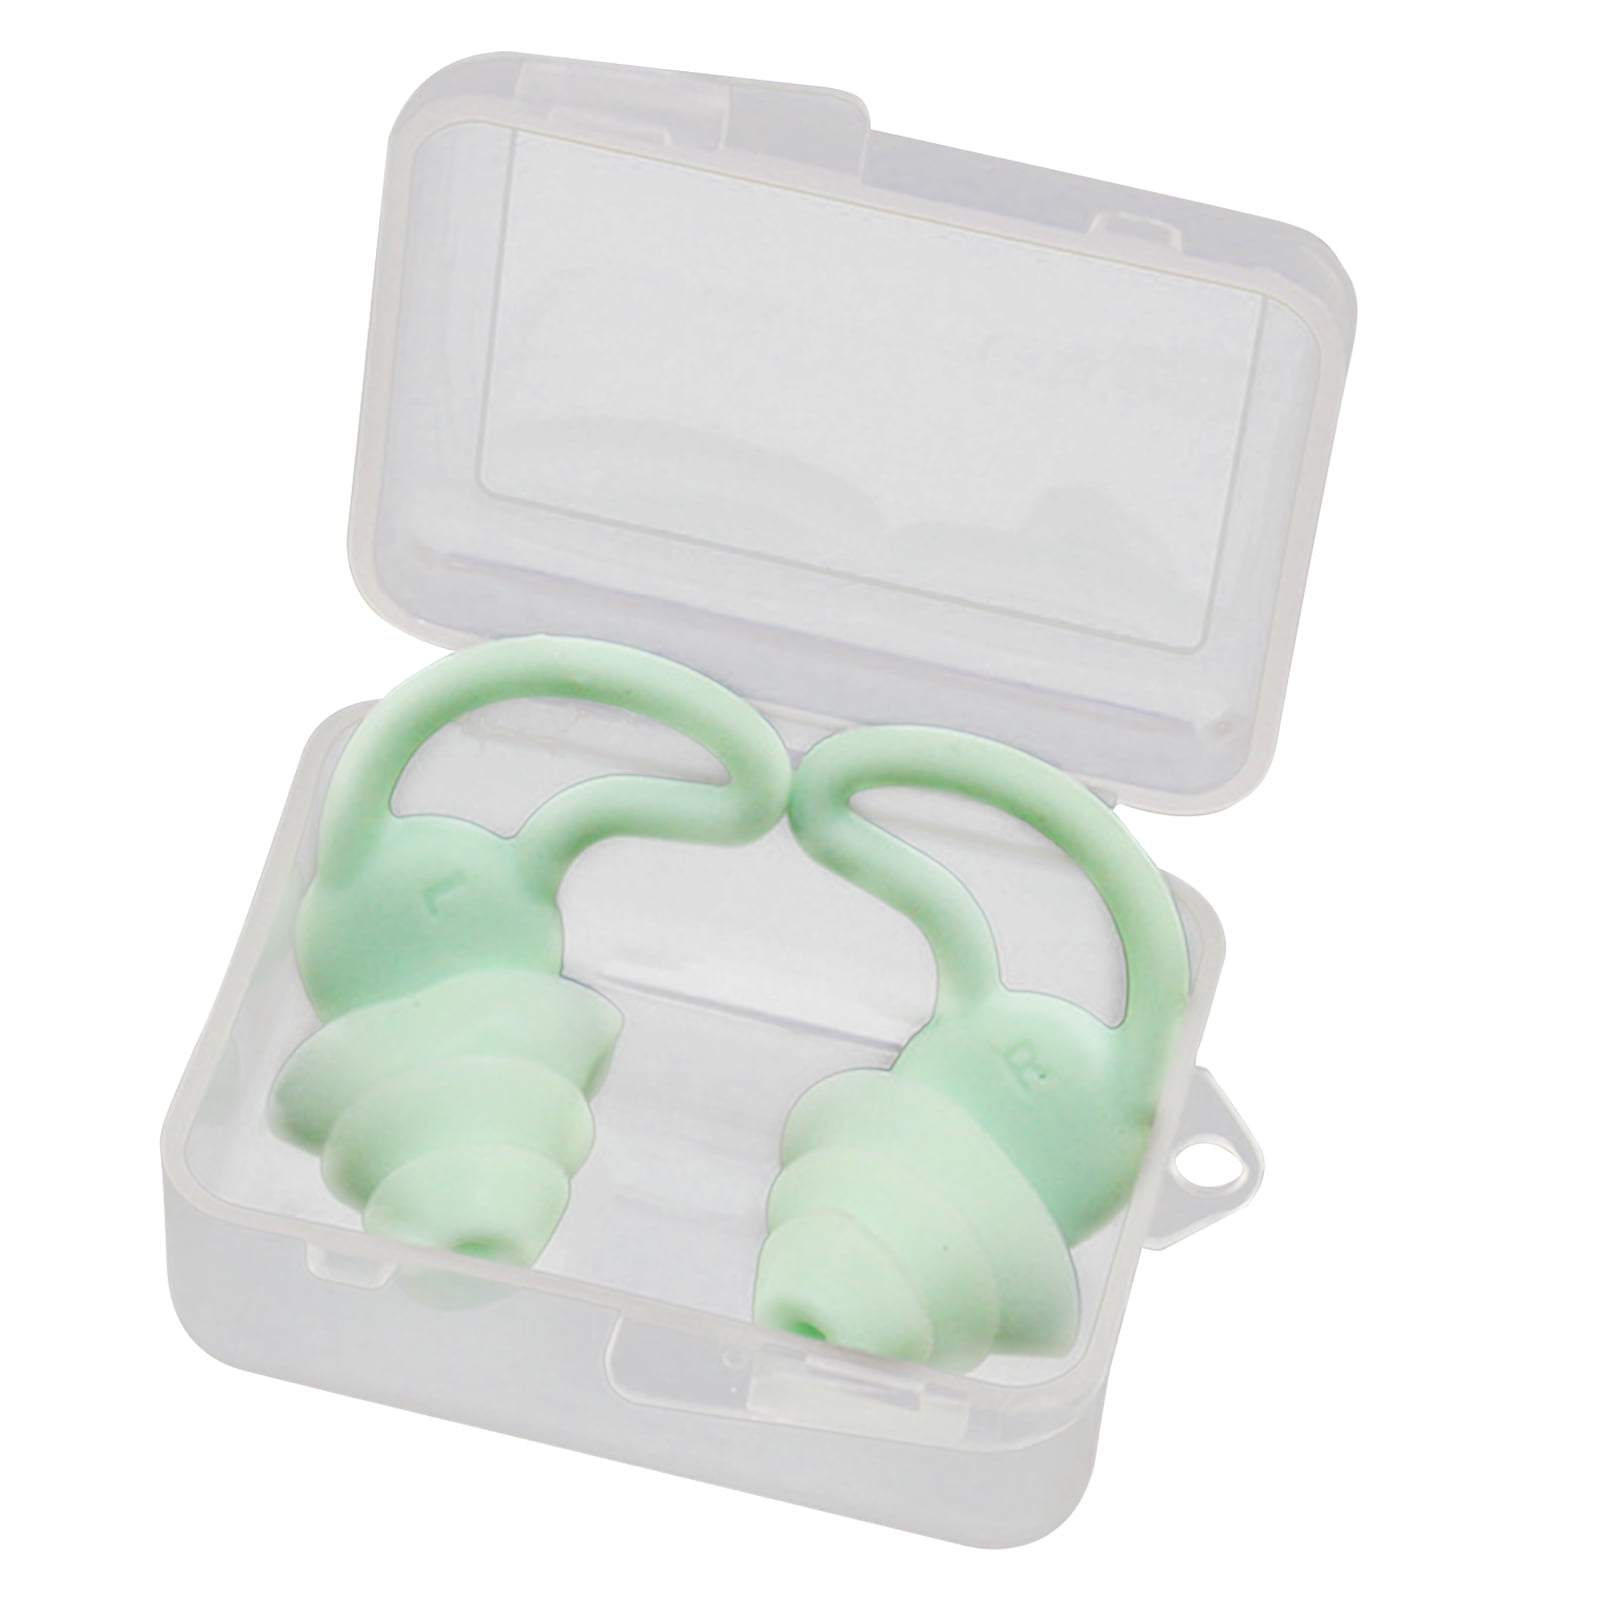 Showering Working-Green Mpow 10 Pairs Swimming Ear Plugs with Storage Box Waterproof Swim Earplugs Adults Sleeping Water-Block Ear Plug for Swimming Surfing SNR 28dB Moldable Silicone Ear Plug